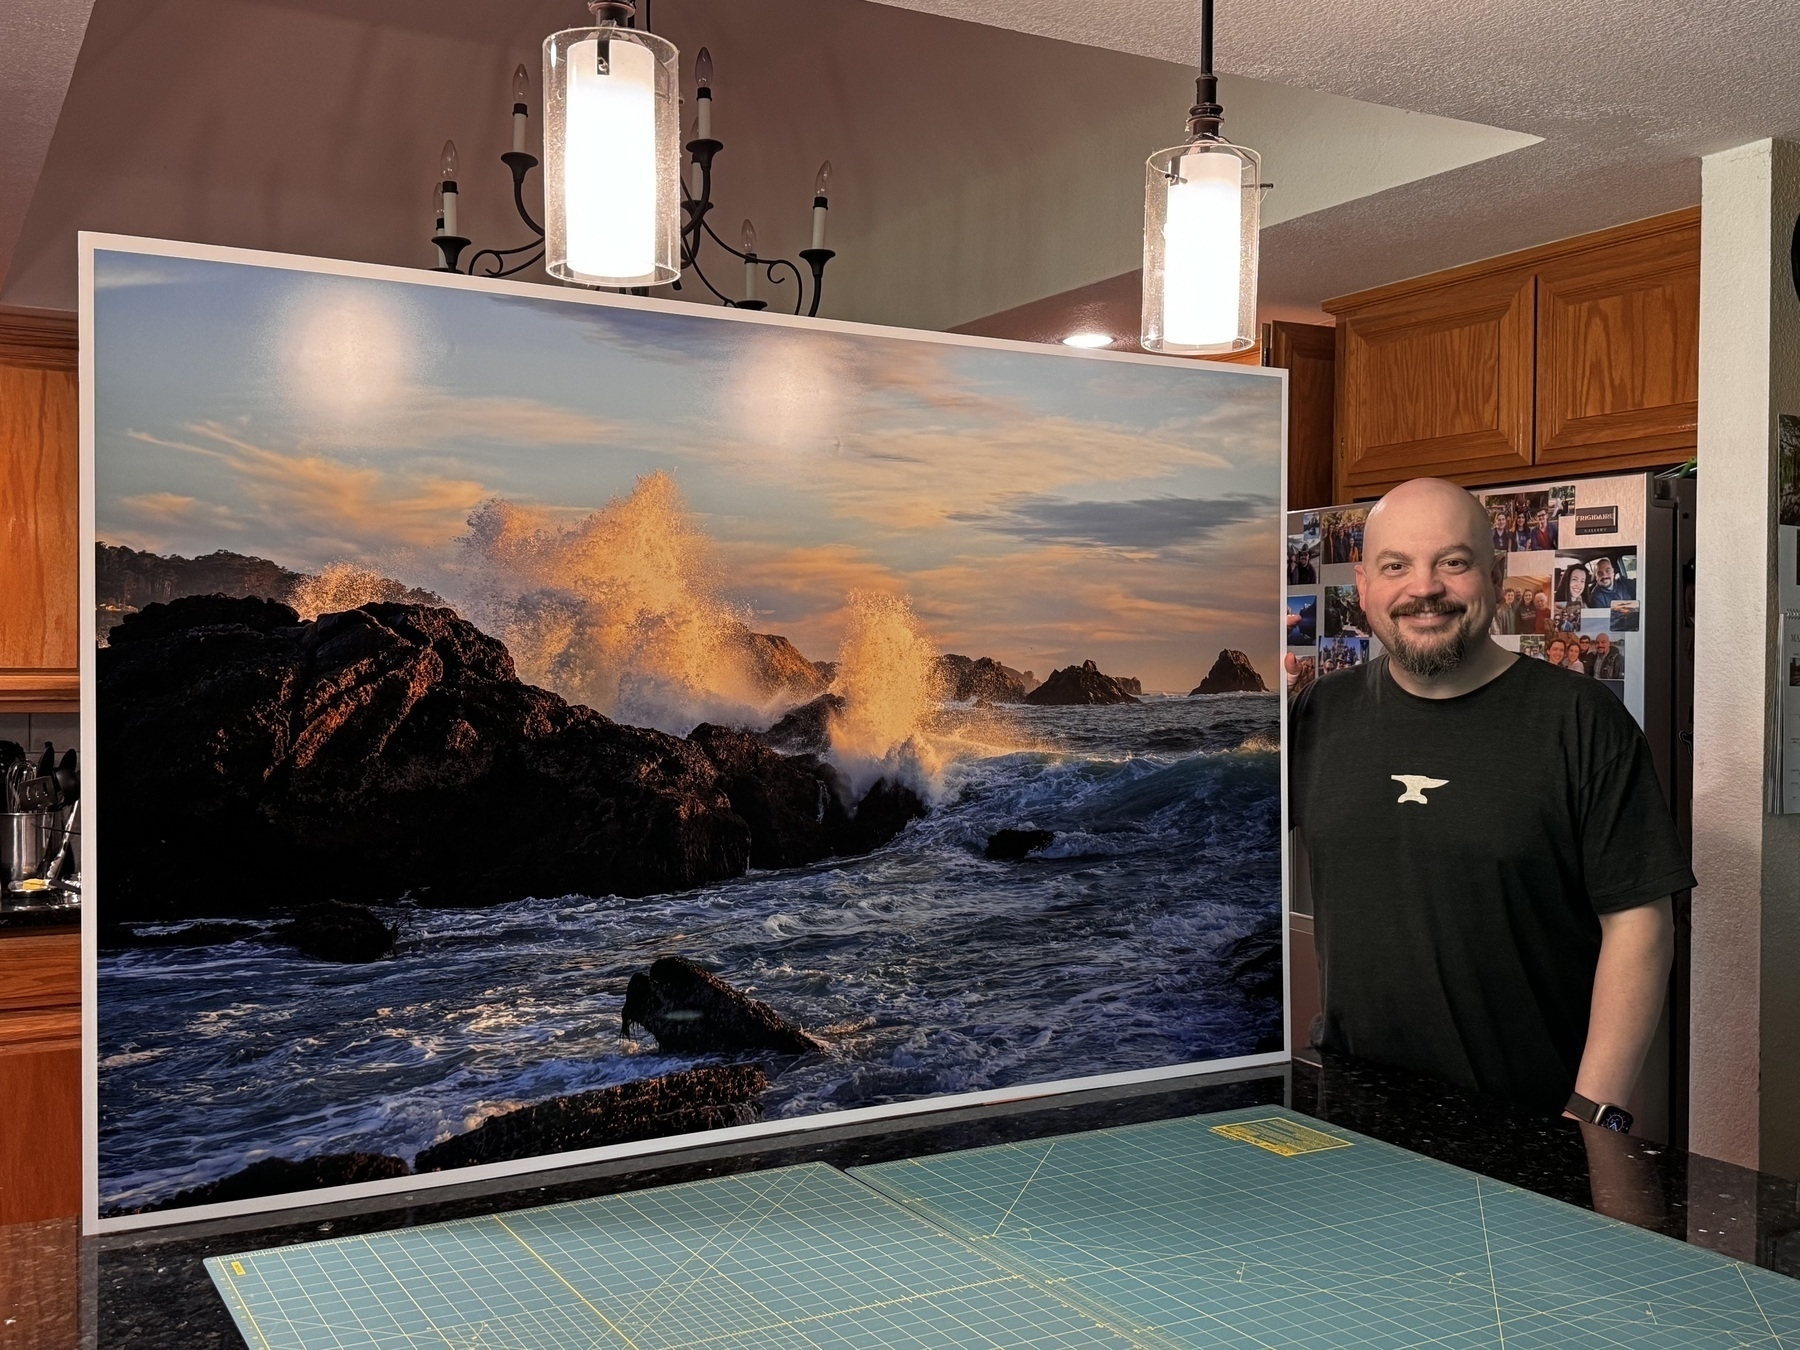 Kirk standing with a very large photo print of a wave crashing onto rocks.